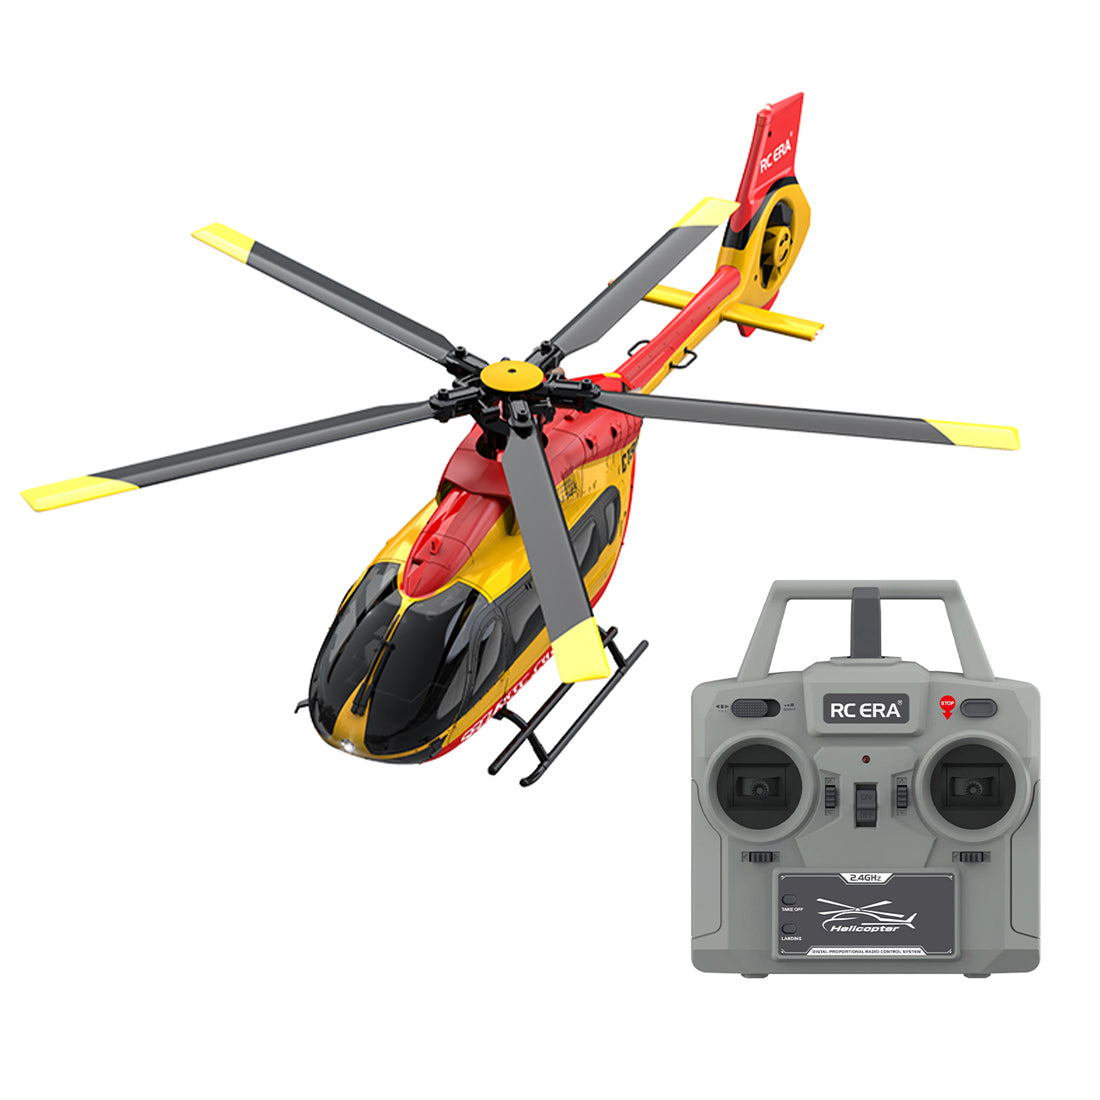 C190 1/30 Scale H145 Helicopter 2.4G 6CH Single-Rotor Gyroscopic Flying Aircraft Model